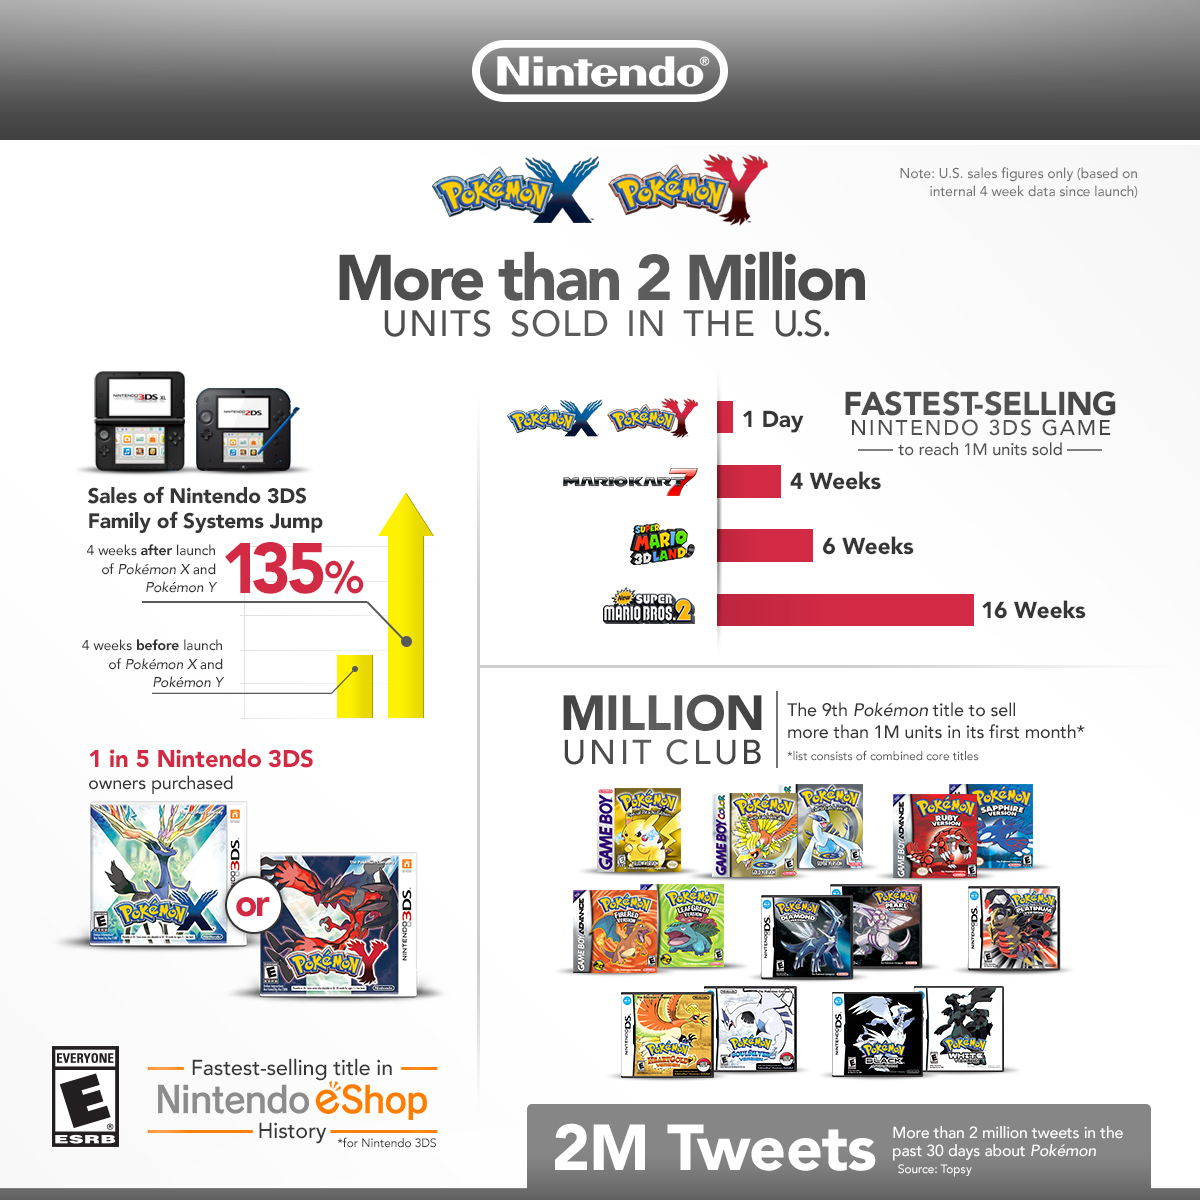 Title Business Pokémon Any and Pokémon Nintendo: 1M Mark Nintendo | Other Reach Faster Than X 3DS Wire Y